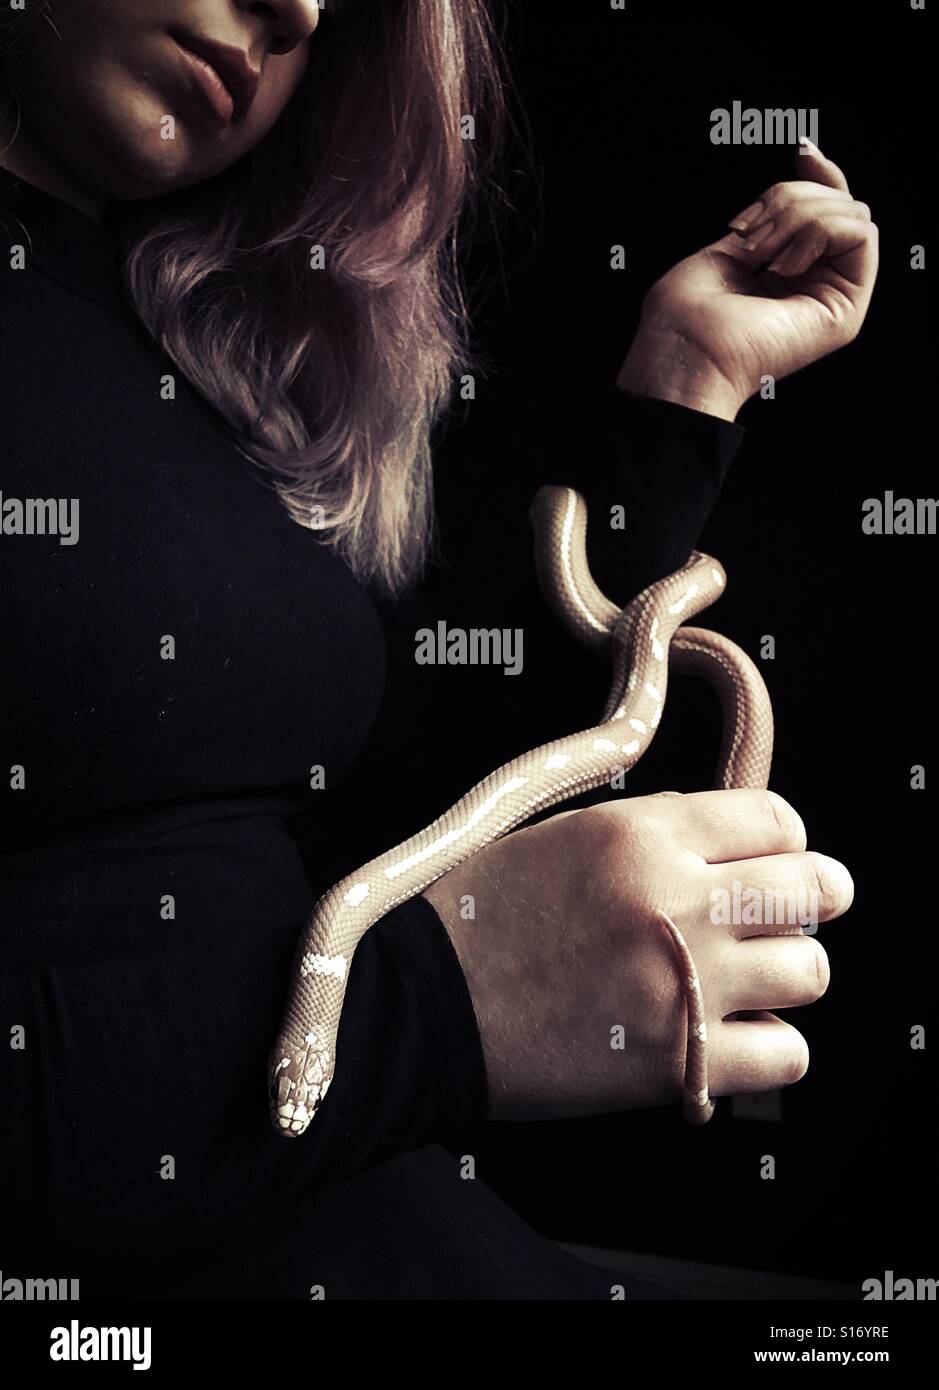 A teenage girl holding a pet snake. Stock Photo